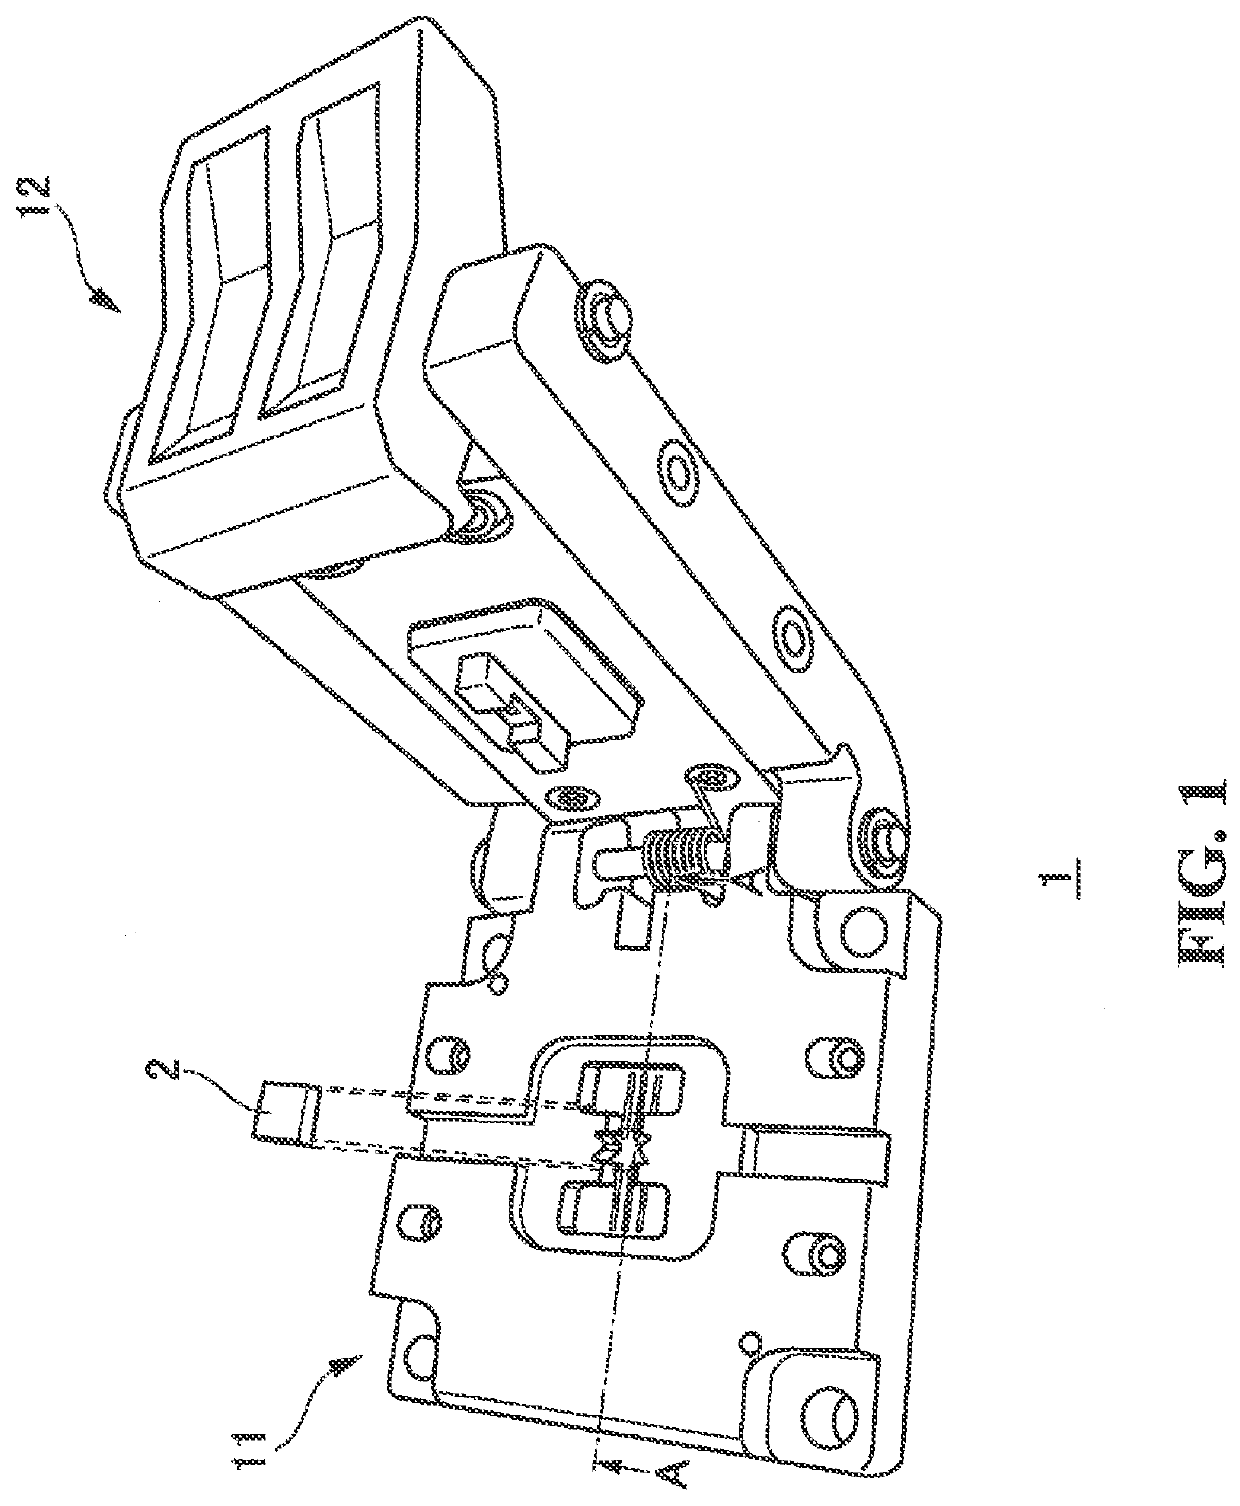 Electrical contactor and electrical connecting apparatus